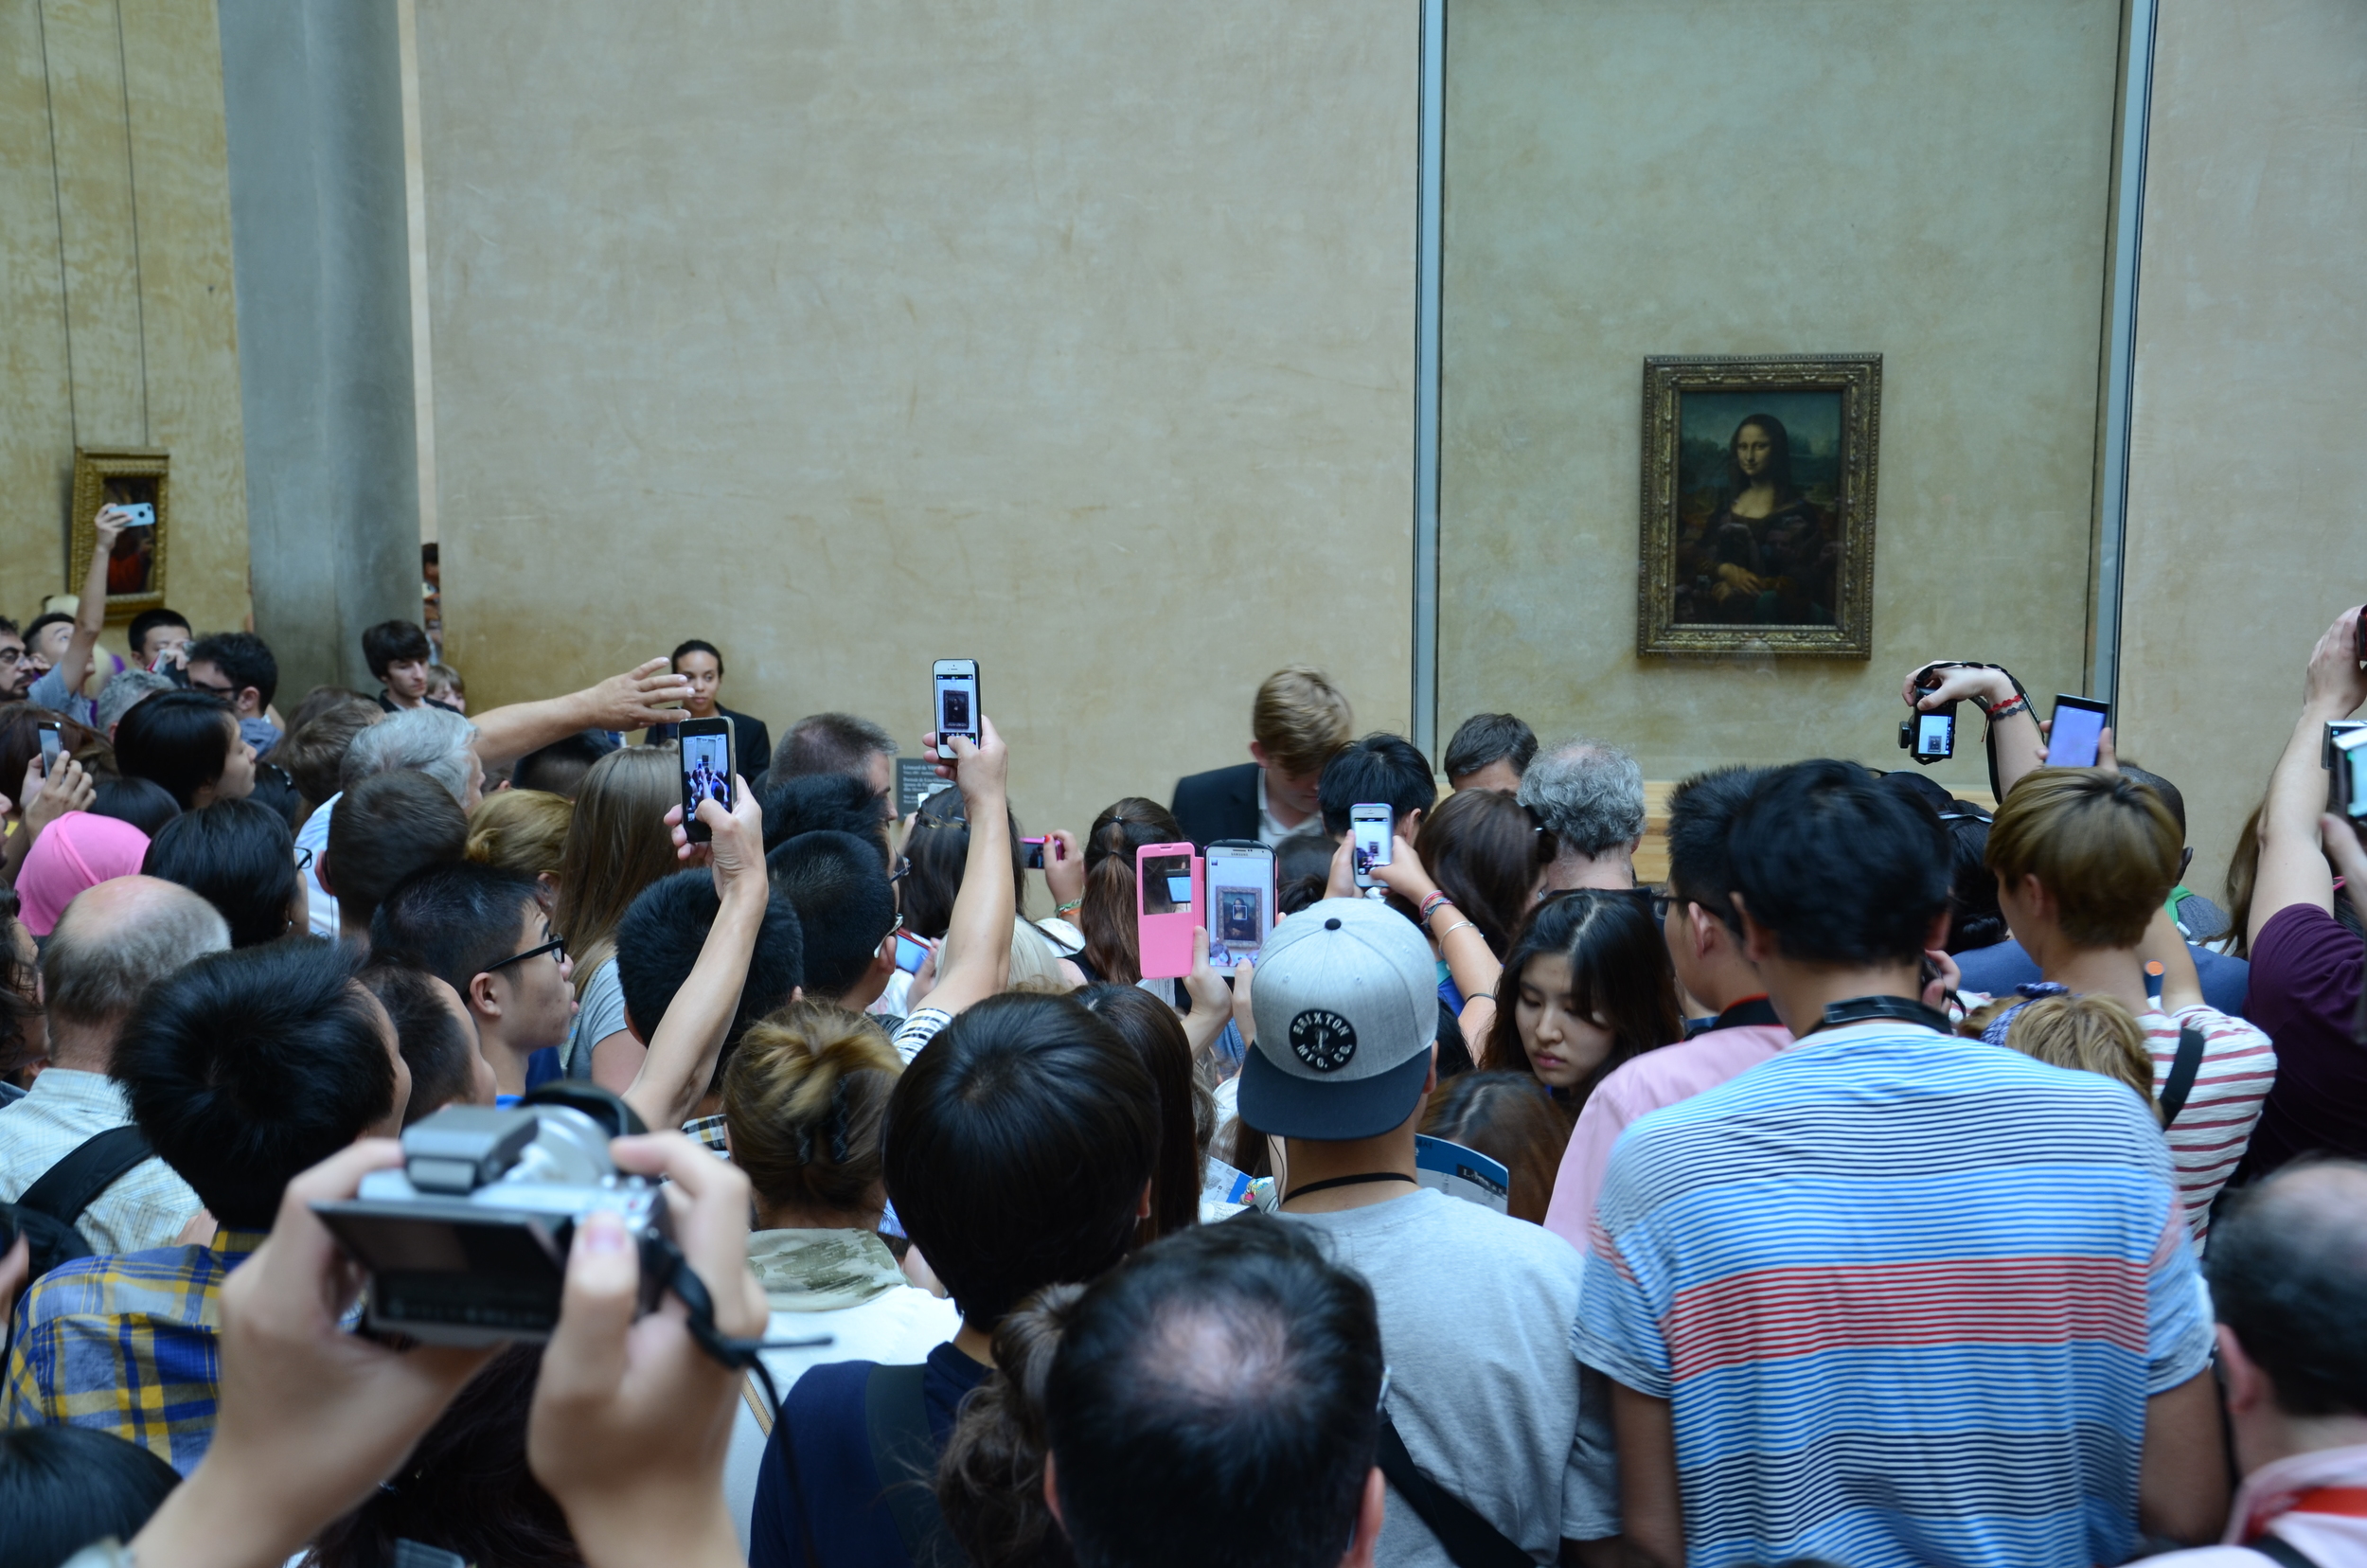  View of the  Mona Lisa  at the Louvre today. 